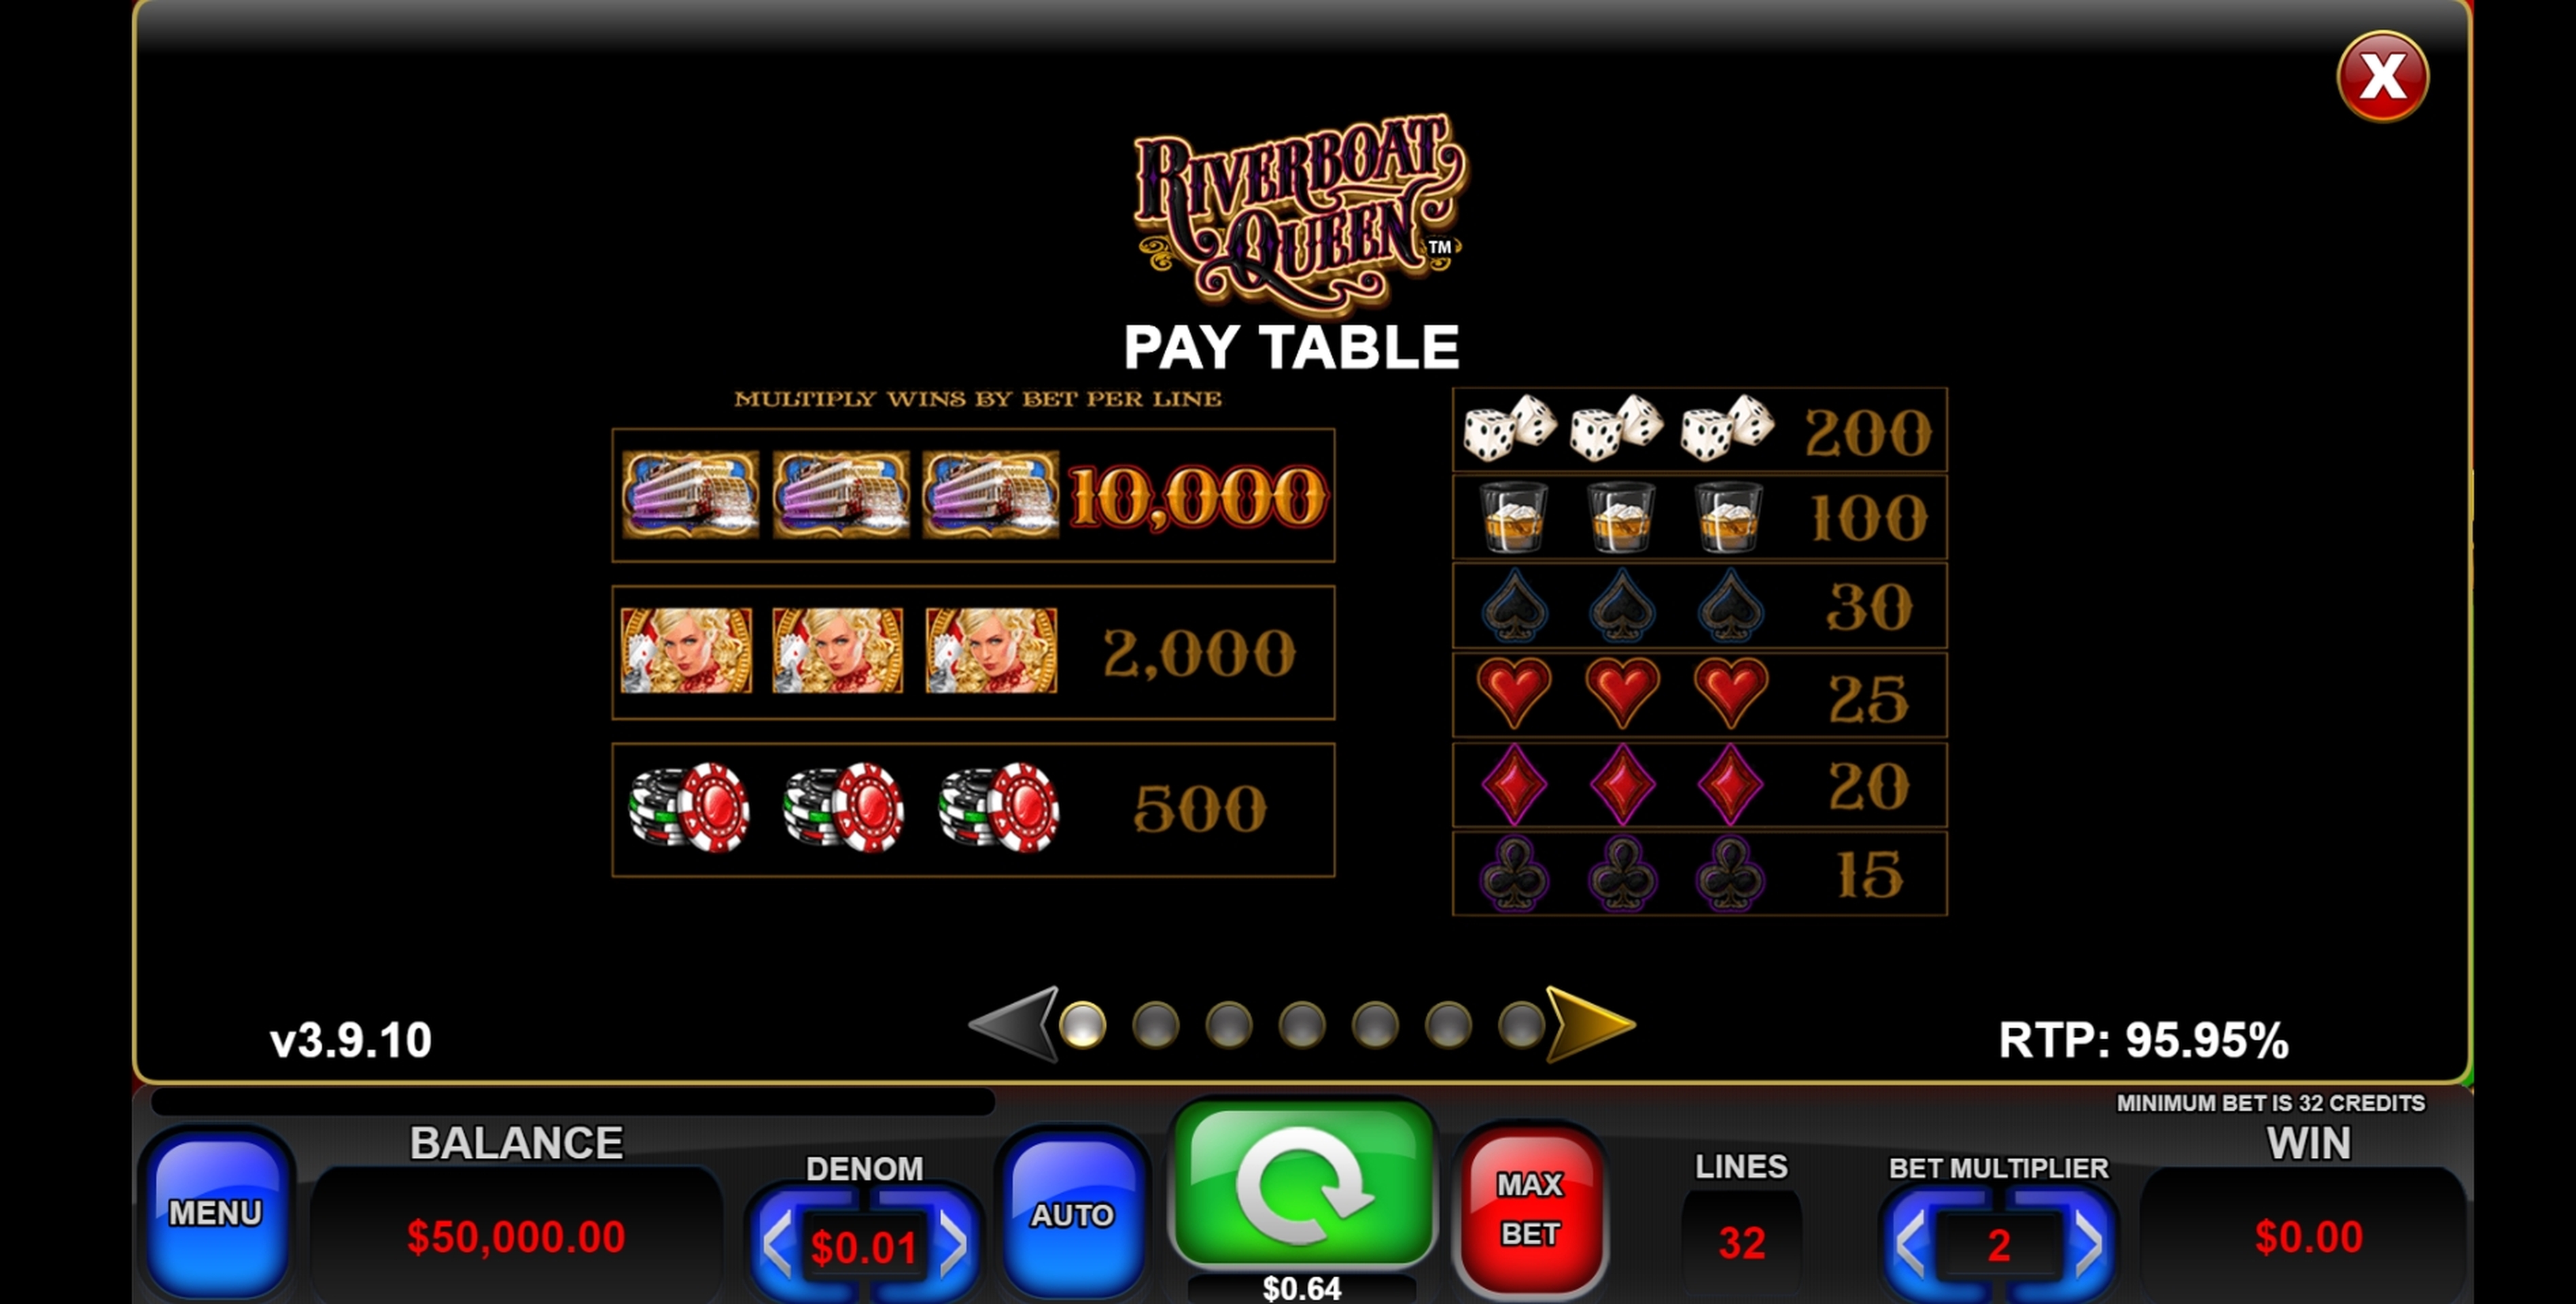 Info of Riverboat Queen Slot Game by Everi